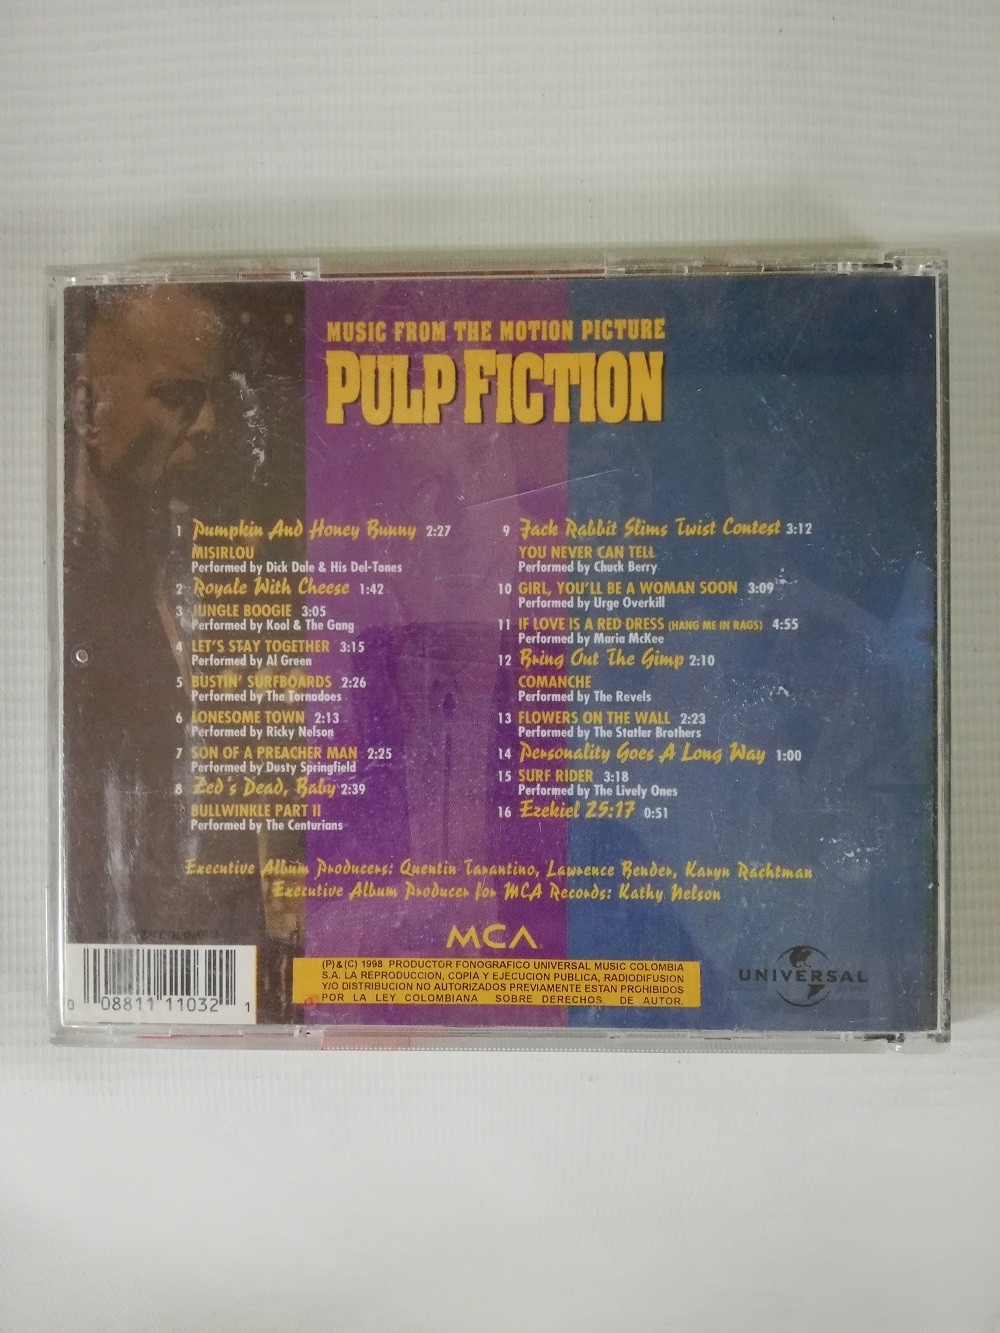 Imagen CD PULP FICTION - MUSIC FROM THE MOTION PICTURE 2